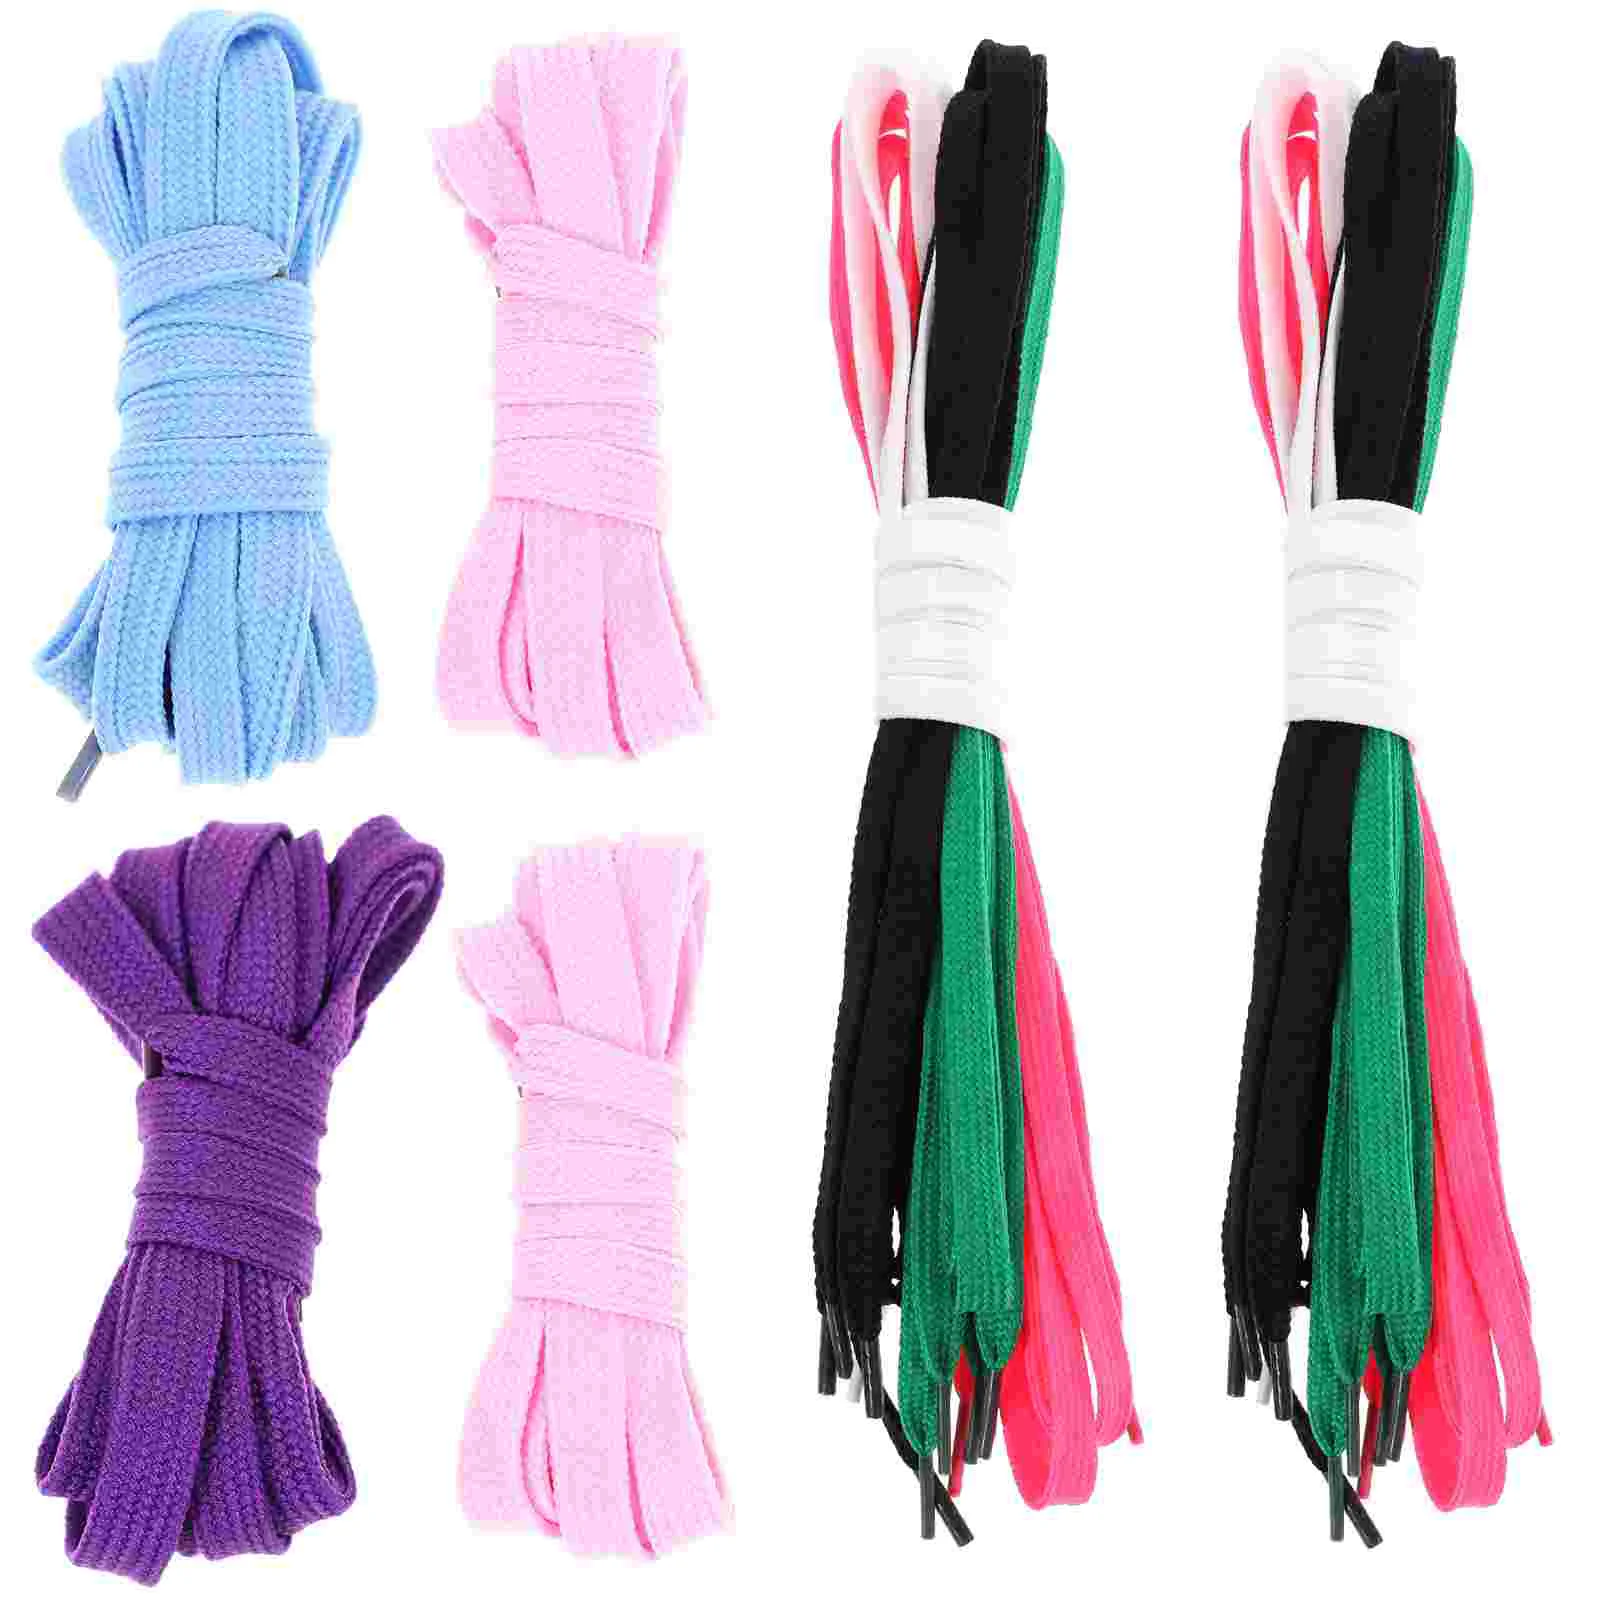 

of Replacement Flat Shoelaces Shoe Laces Strings for Sports Shoes /Boots /Sneakers /Skates (Assorted Colors)